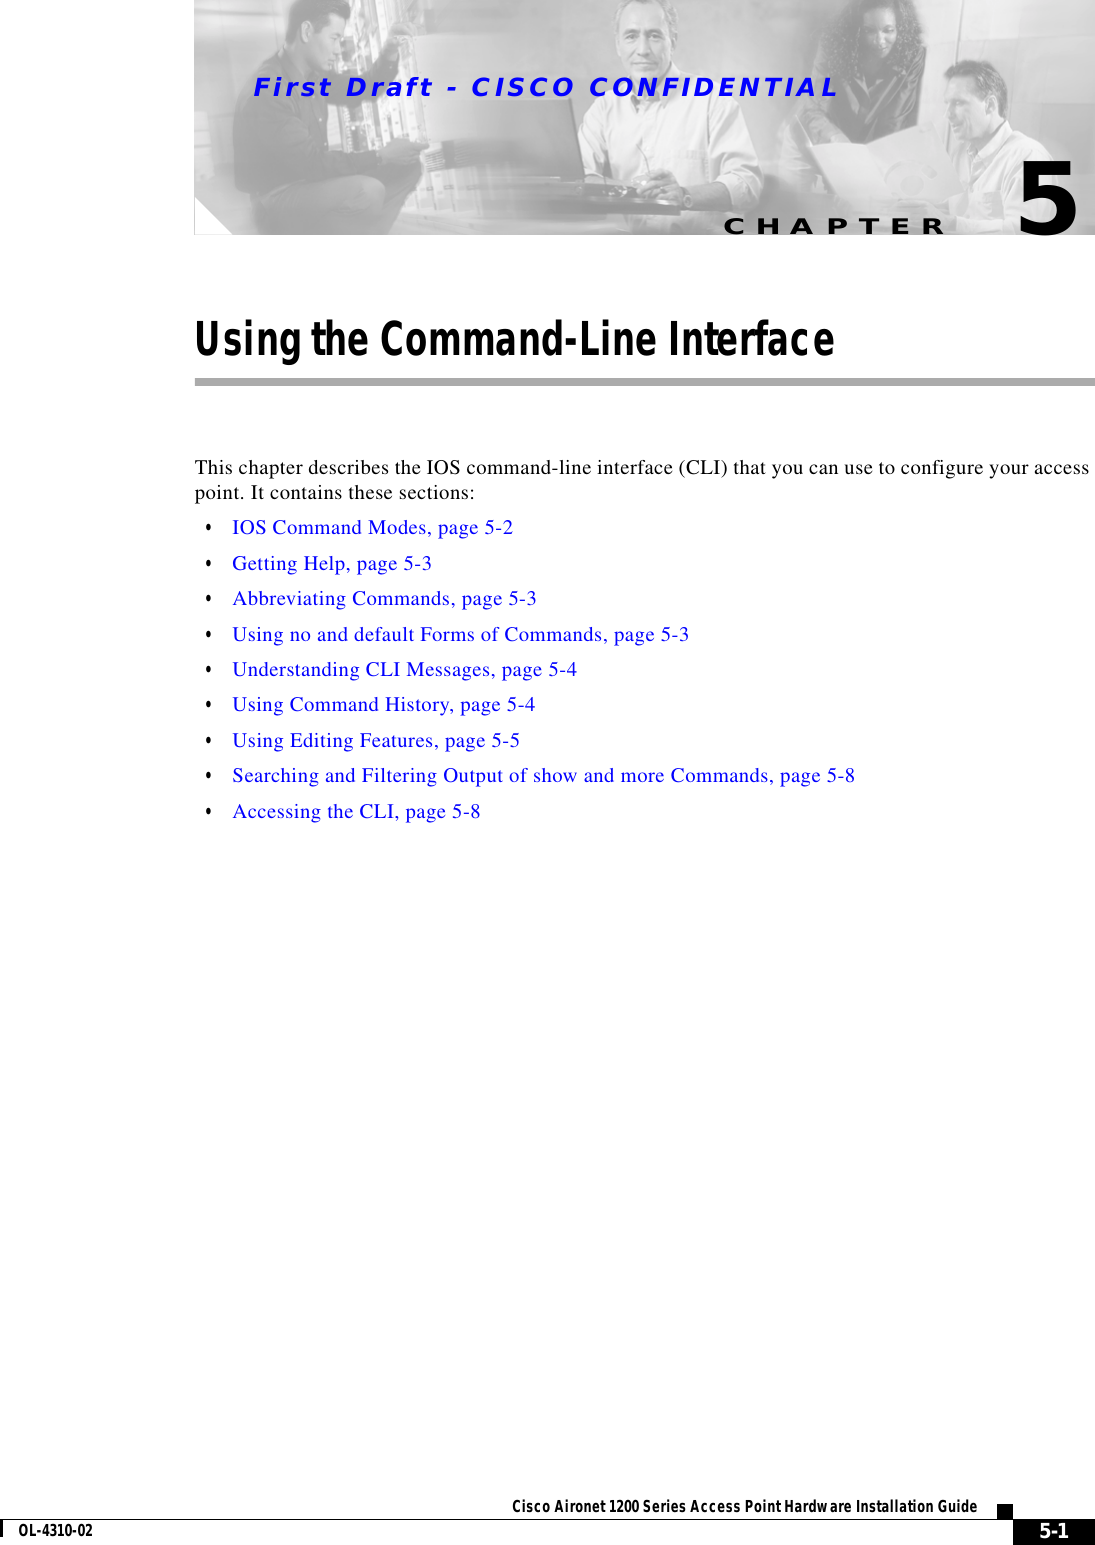 CHAPTERFirst Draft - CISCO CONFIDENTIAL5-1Cisco Aironet 1200 Series Access Point Hardware Installation GuideOL-4310-025Using the Command-Line InterfaceThis chapter describes the IOS command-line interface (CLI) that you can use to configure your access point. It contains these sections:•IOS Command Modes, page 5-2•Getting Help, page 5-3•Abbreviating Commands, page 5-3•Using no and default Forms of Commands, page 5-3•Understanding CLI Messages, page 5-4•Using Command History, page 5-4•Using Editing Features, page 5-5•Searching and Filtering Output of show and more Commands, page 5-8•Accessing the CLI, page 5-8